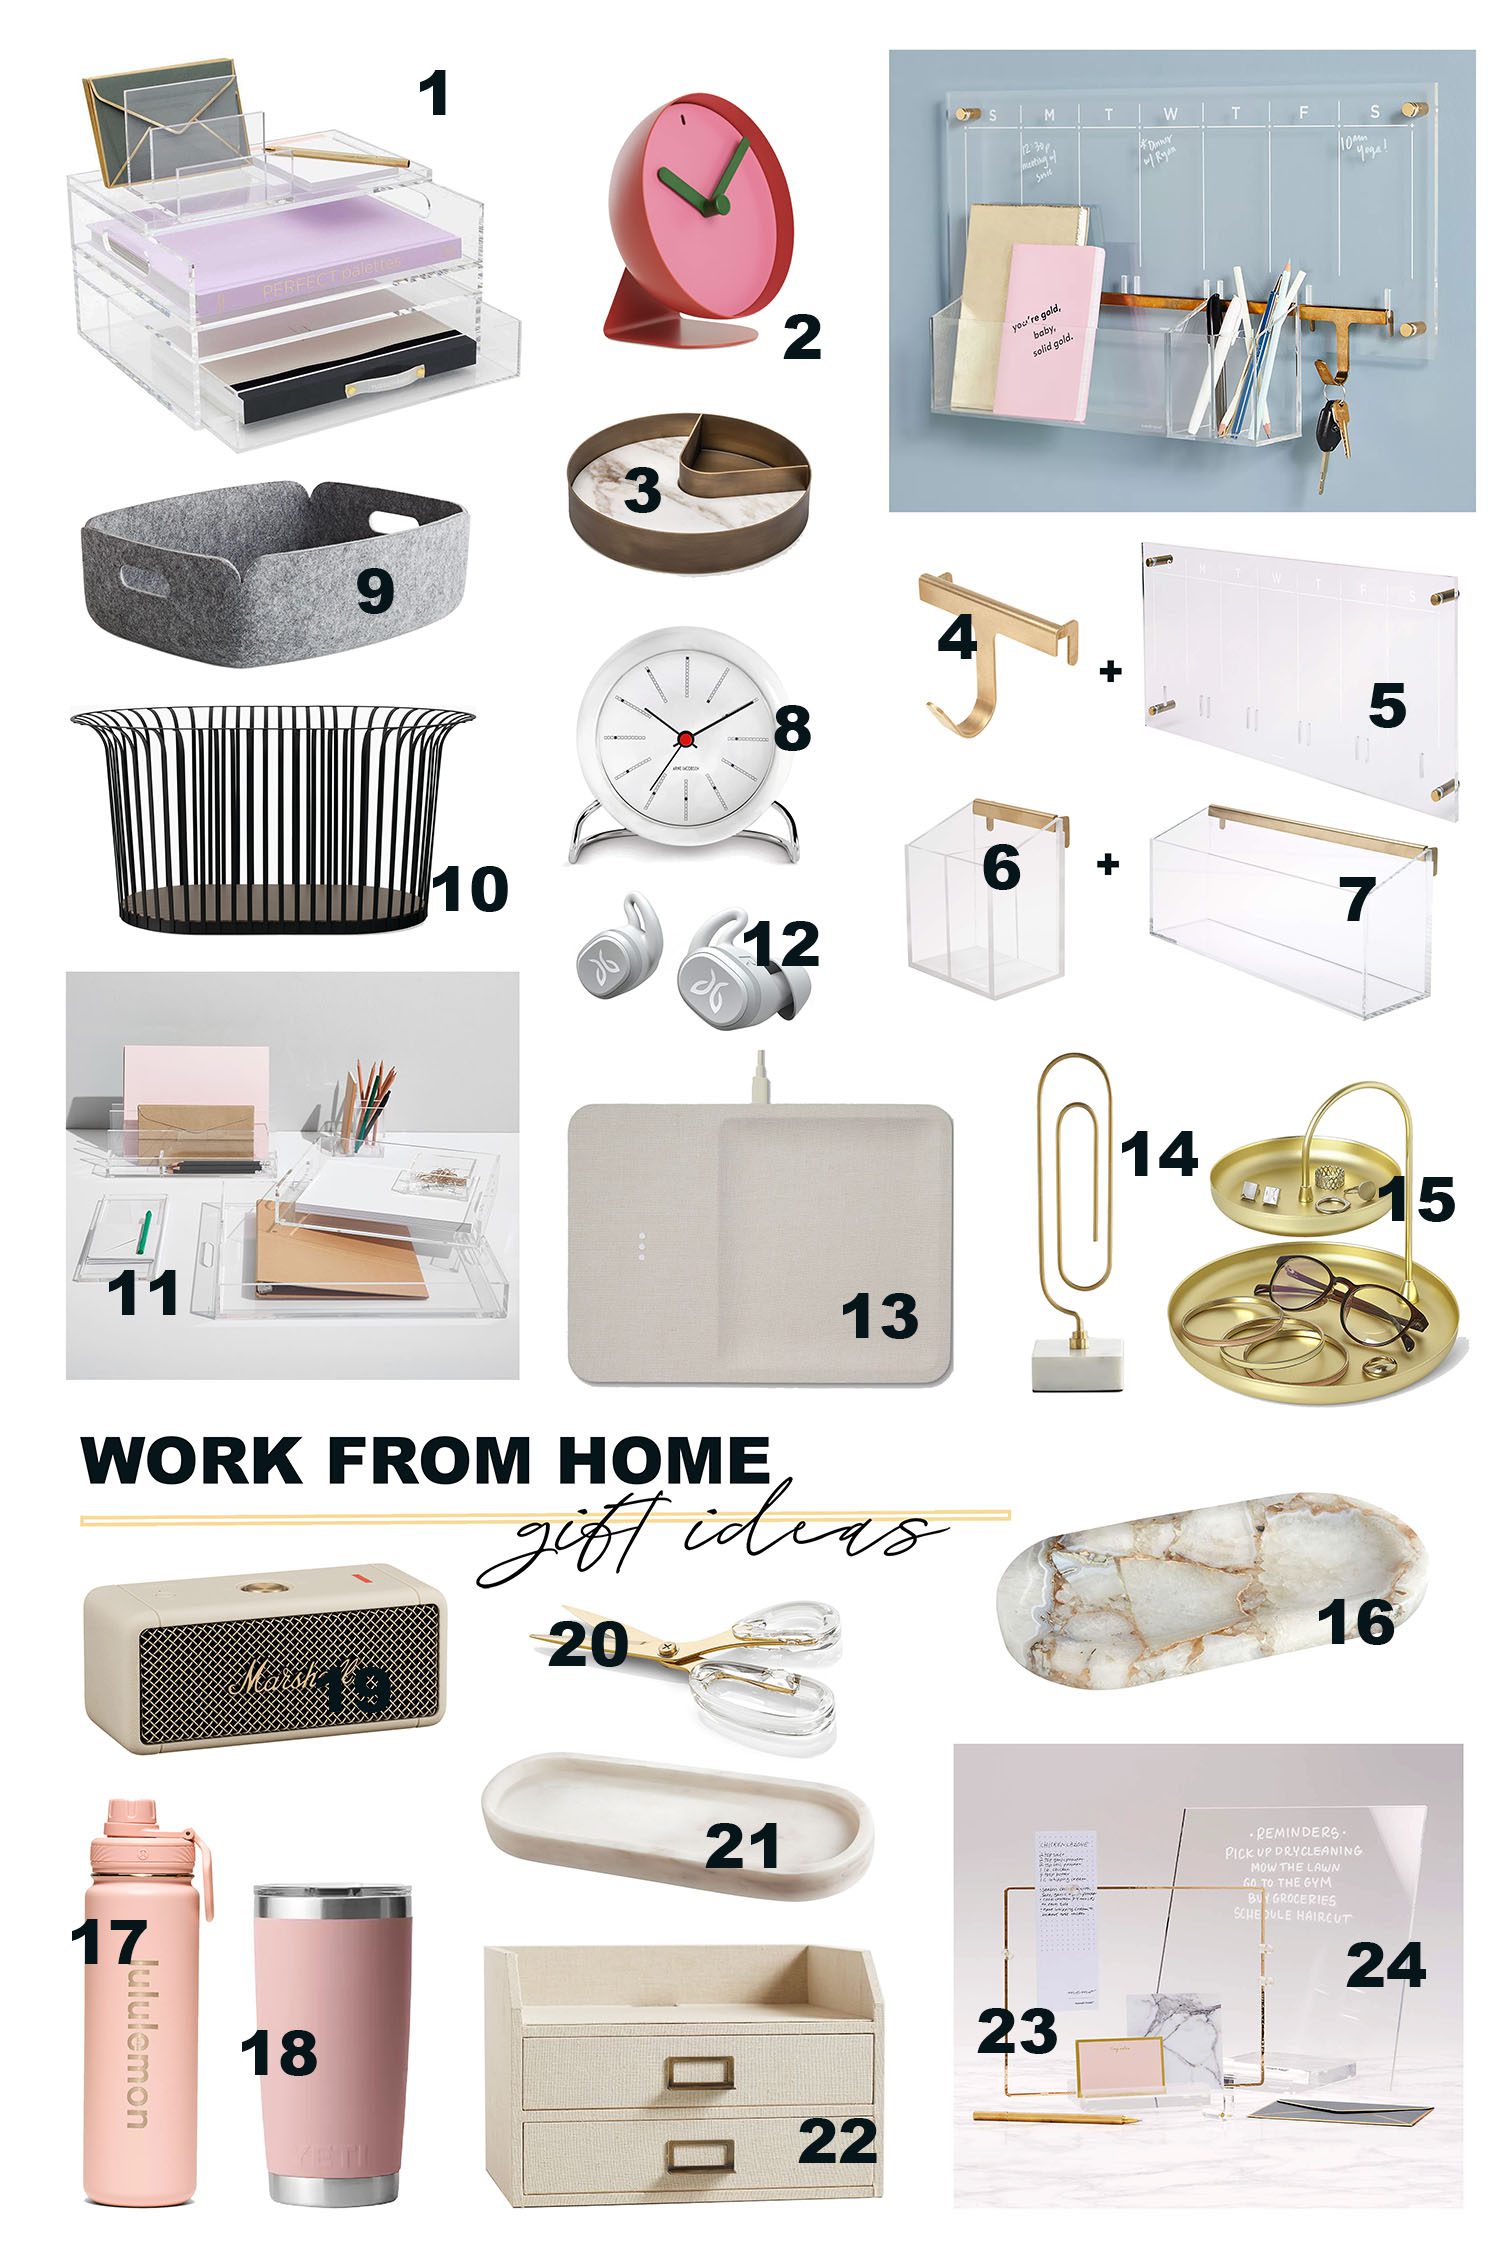 The Best Gifts for WFH, Holiday Gift Guide